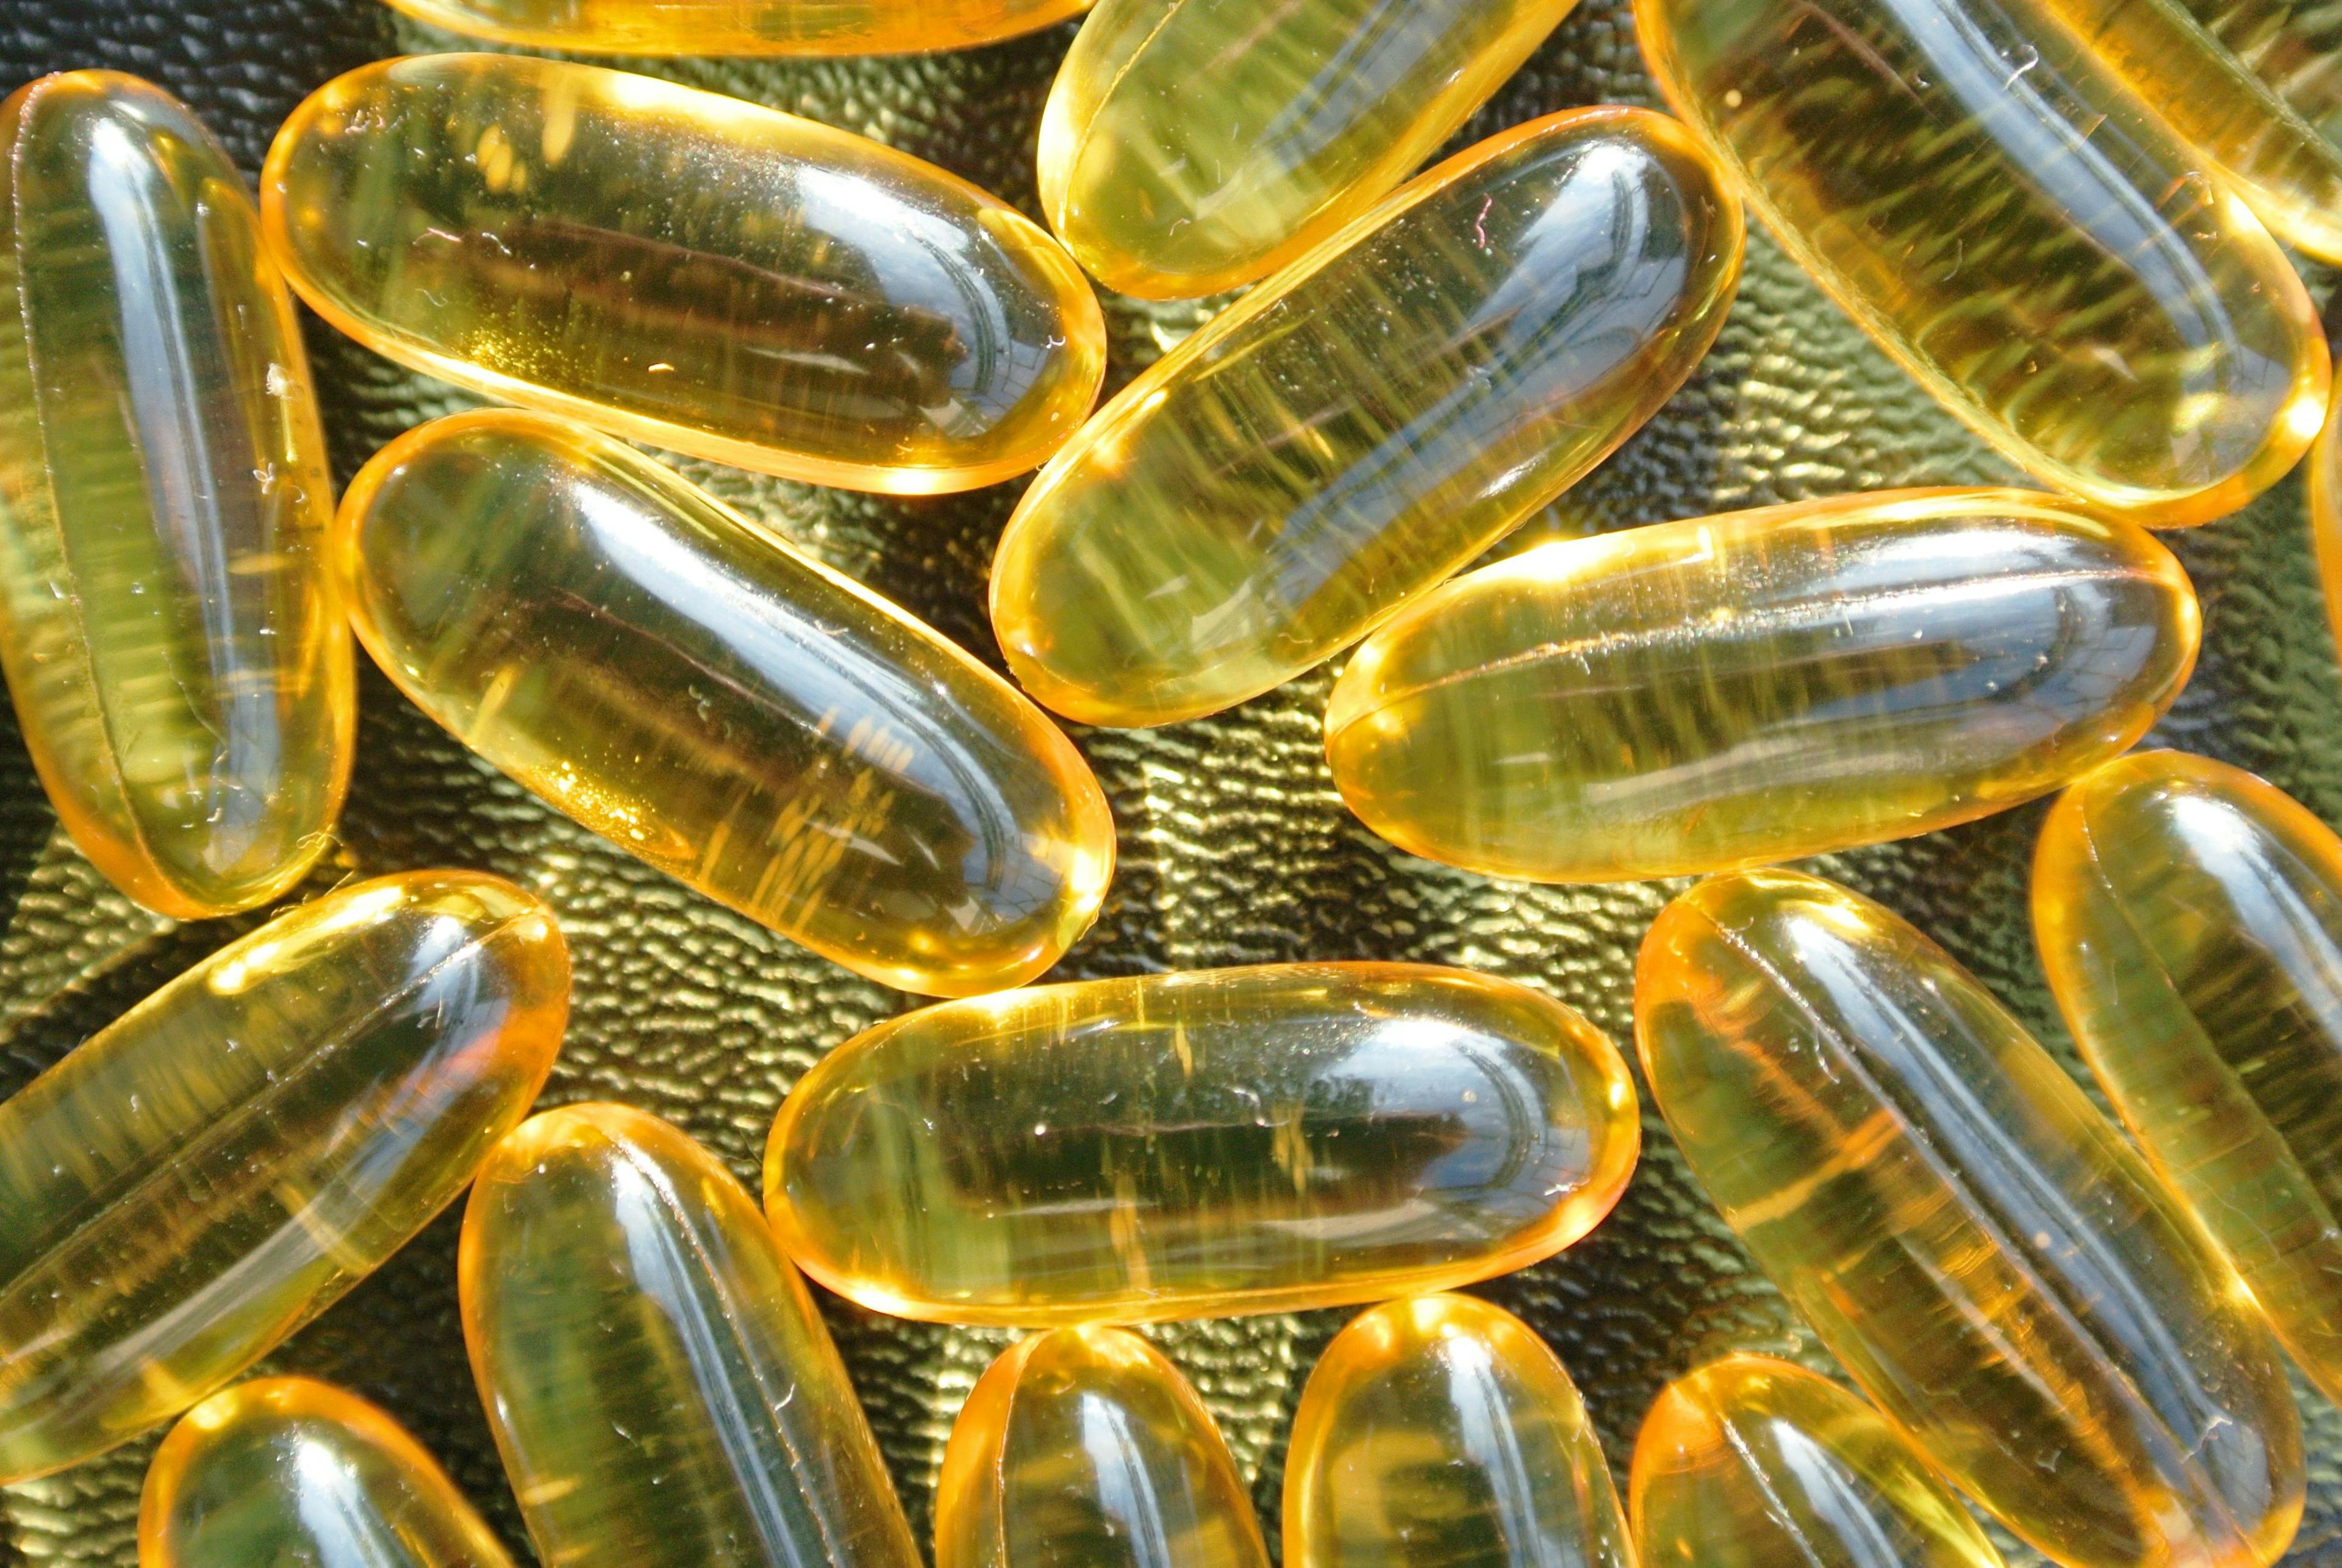 Mayo Clinic Study Finds Definitive Link Between Omega-3 Intake and Cardiovascular Risk